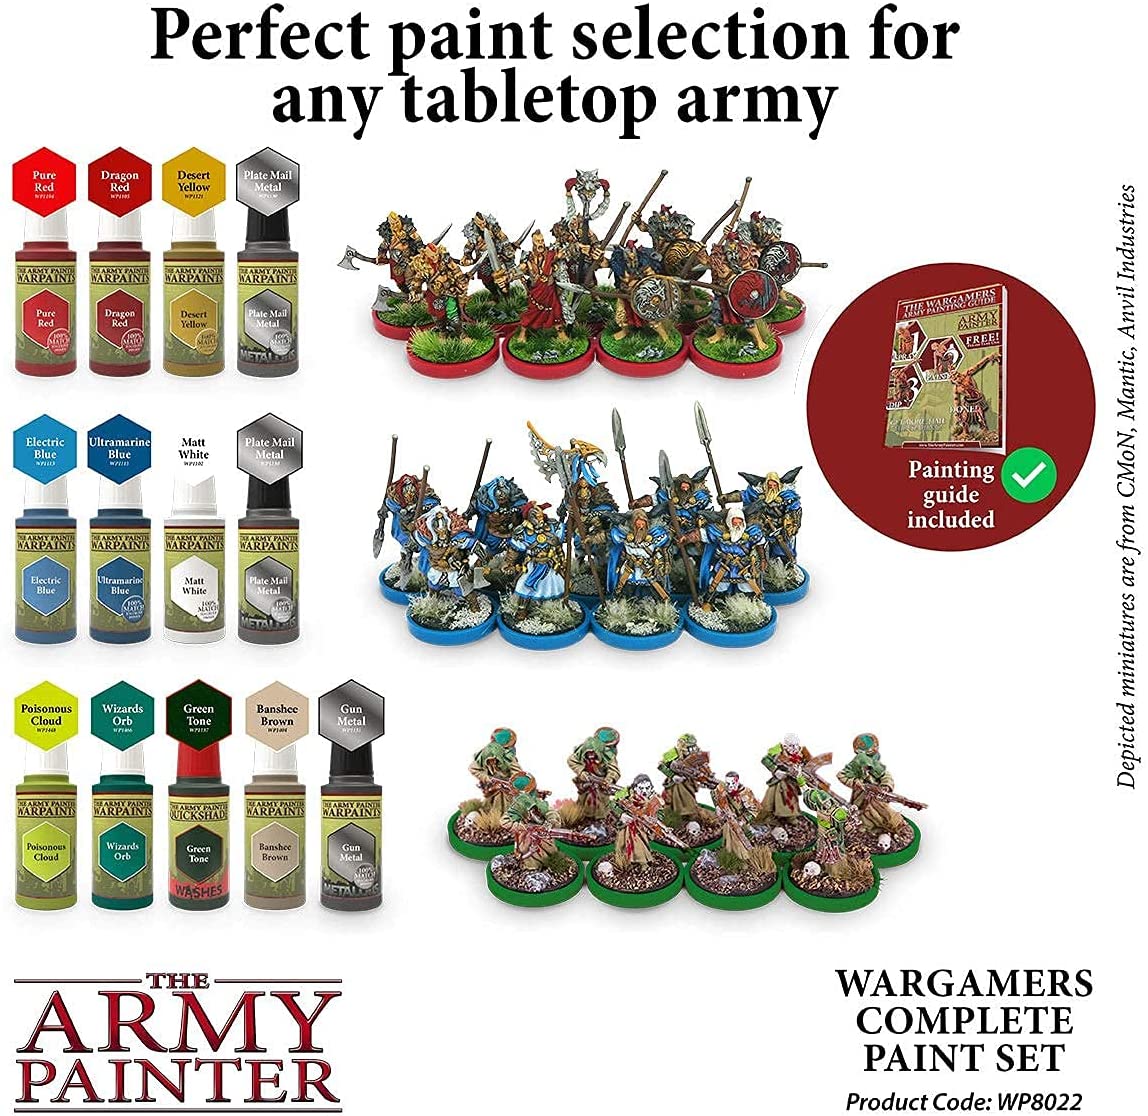 The Army Painter. Wargamers Complete Paint Set kit info